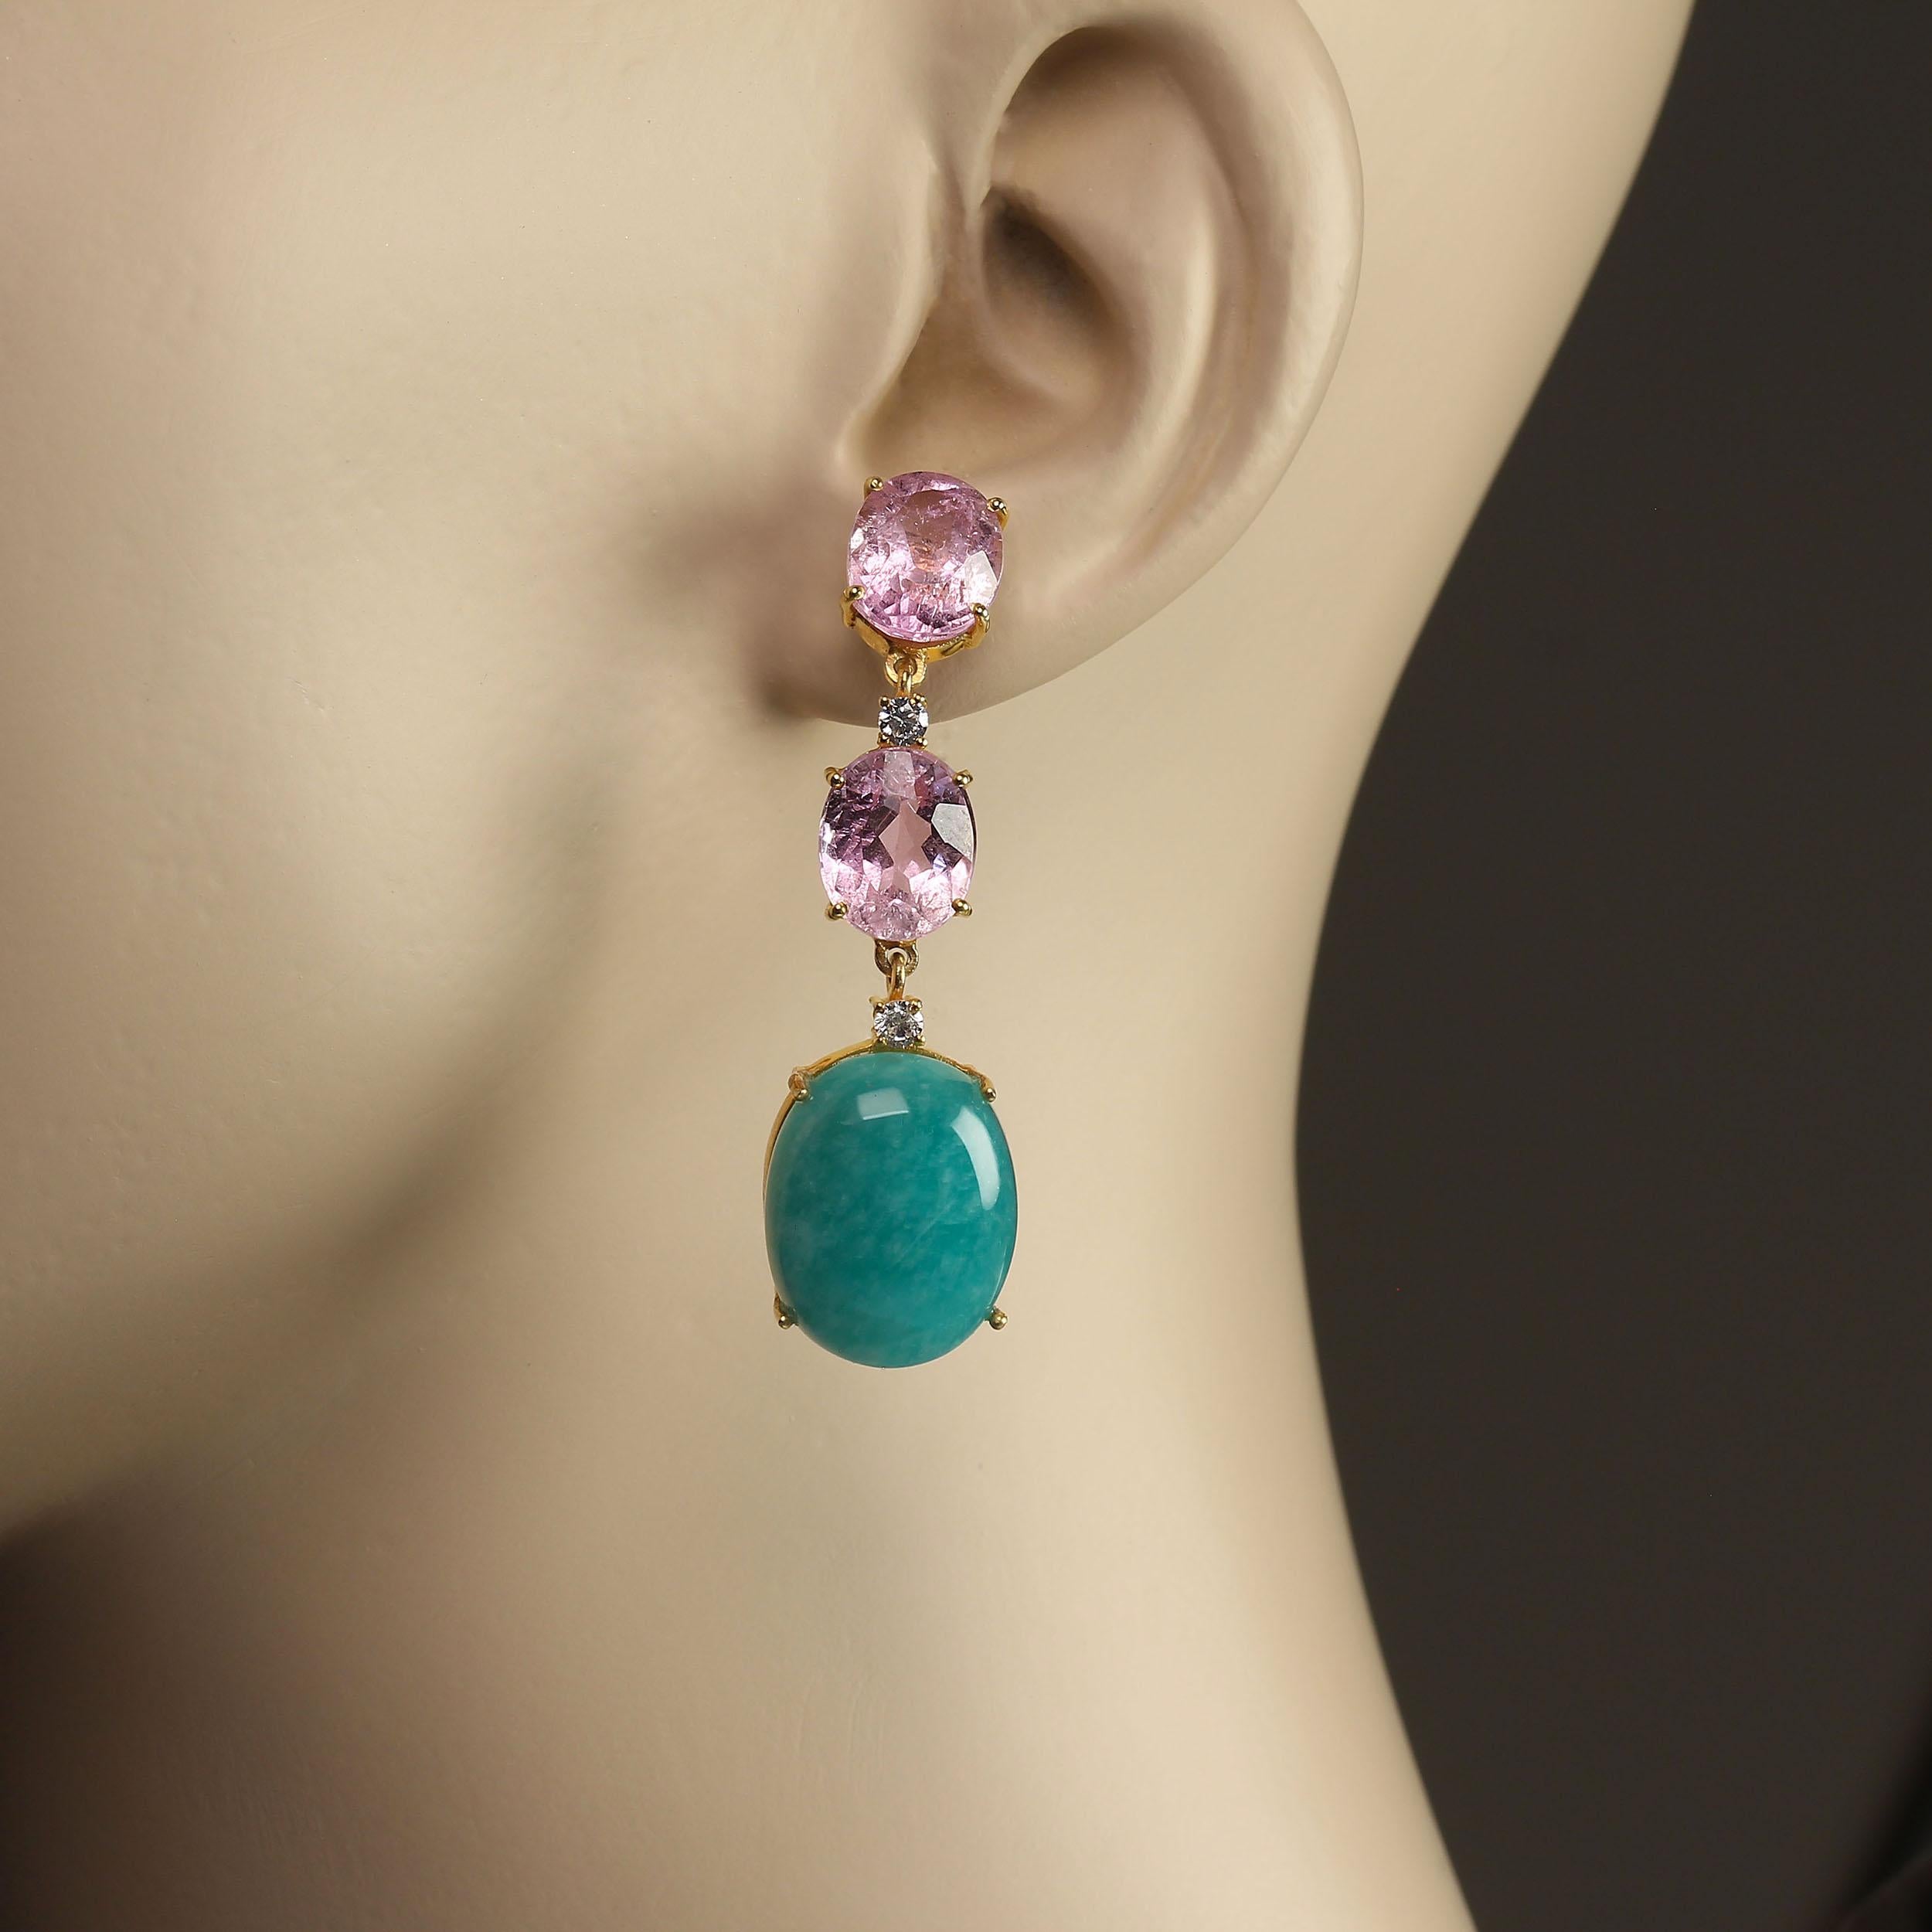 Sparkling, dangling, swinging earrings for nighttime elegance. These gorgeous earrings are two inches in length.  They are two sparkling bright pink Kunzites with scintillating Cambodian Zircons below them and then a glowing Amazonite cabochon.